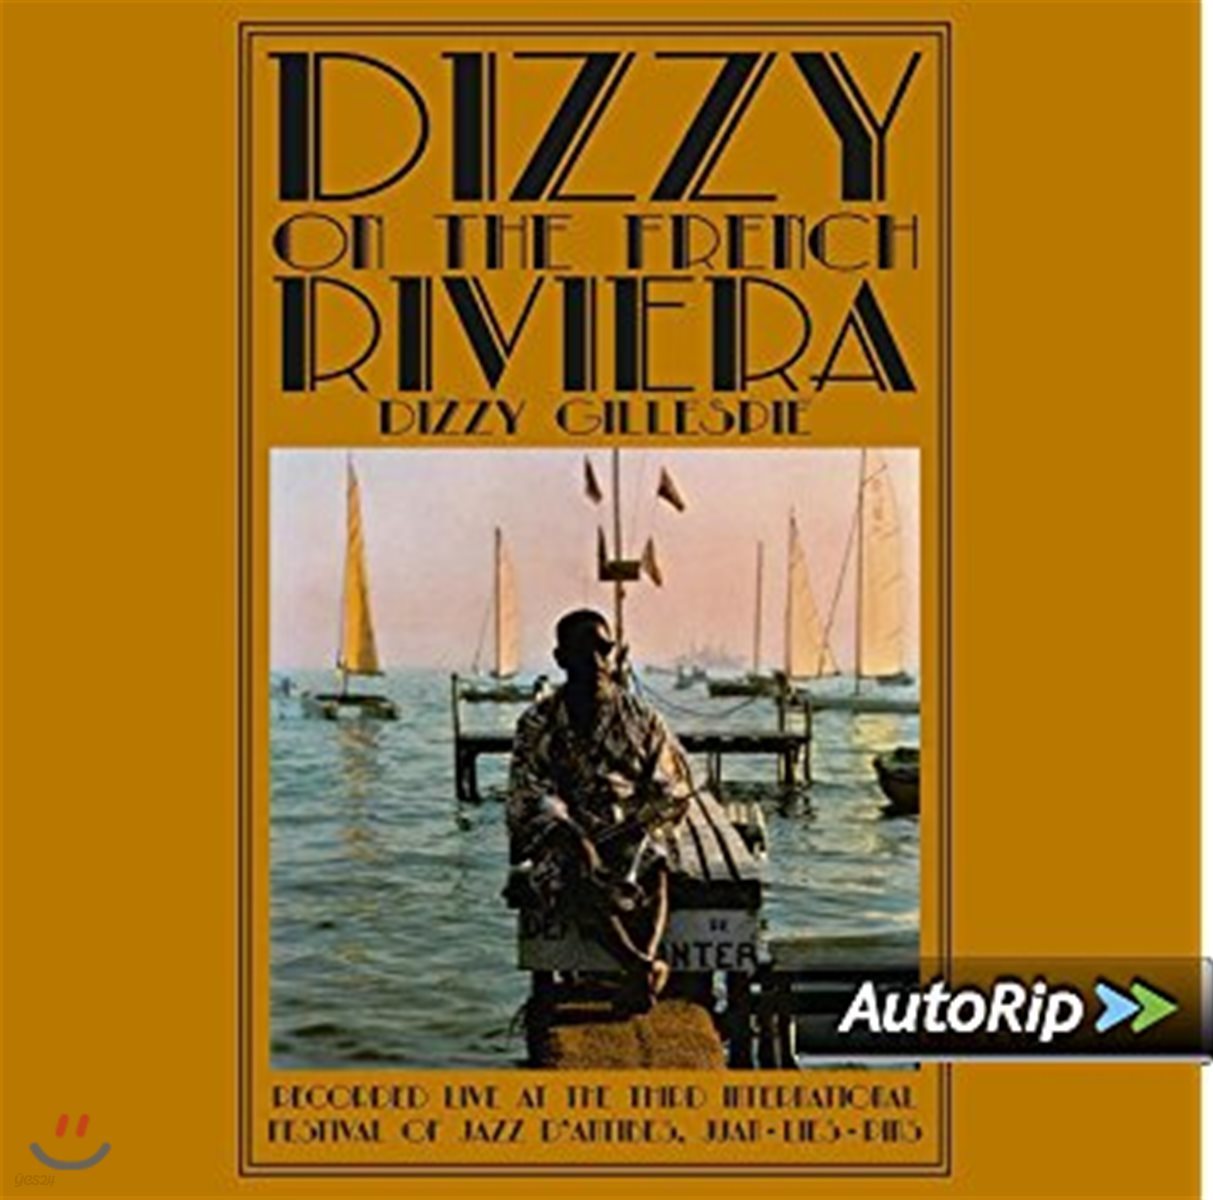 Dizzy Gillespie (디지 길레스피) - Dizzy On The French Riviera [Limited Edition LP]